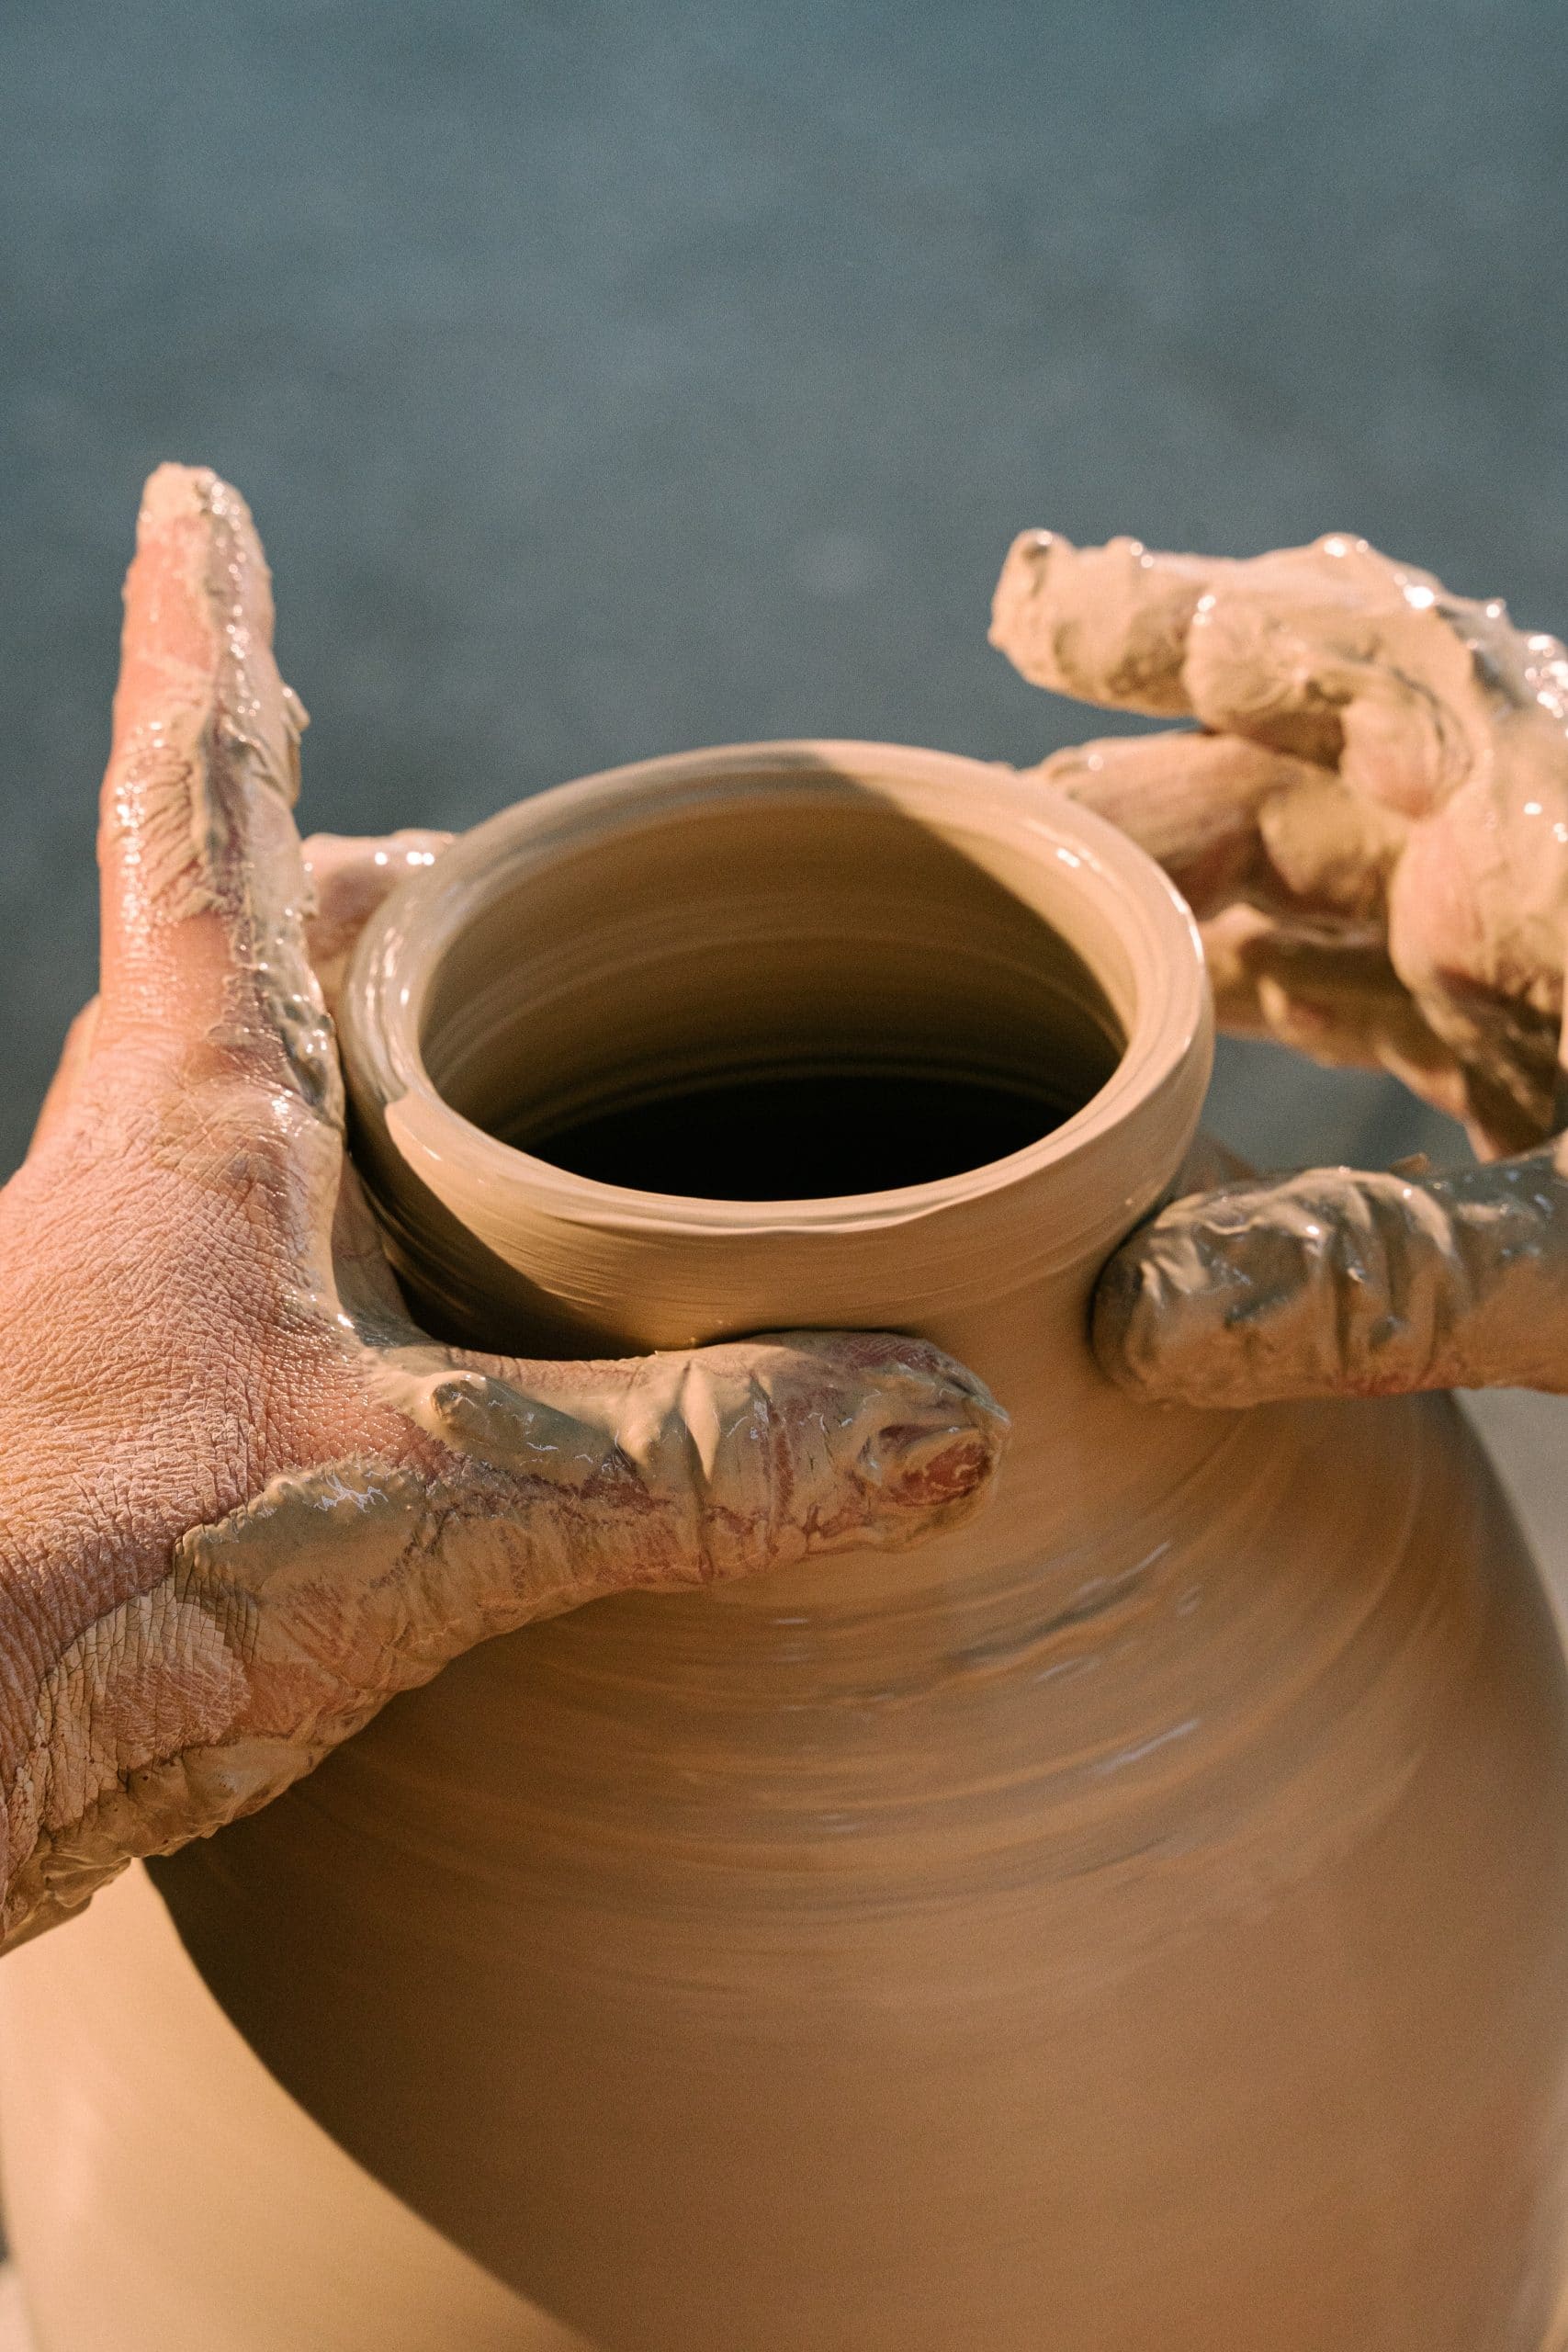 Two hands molding a pottery jug